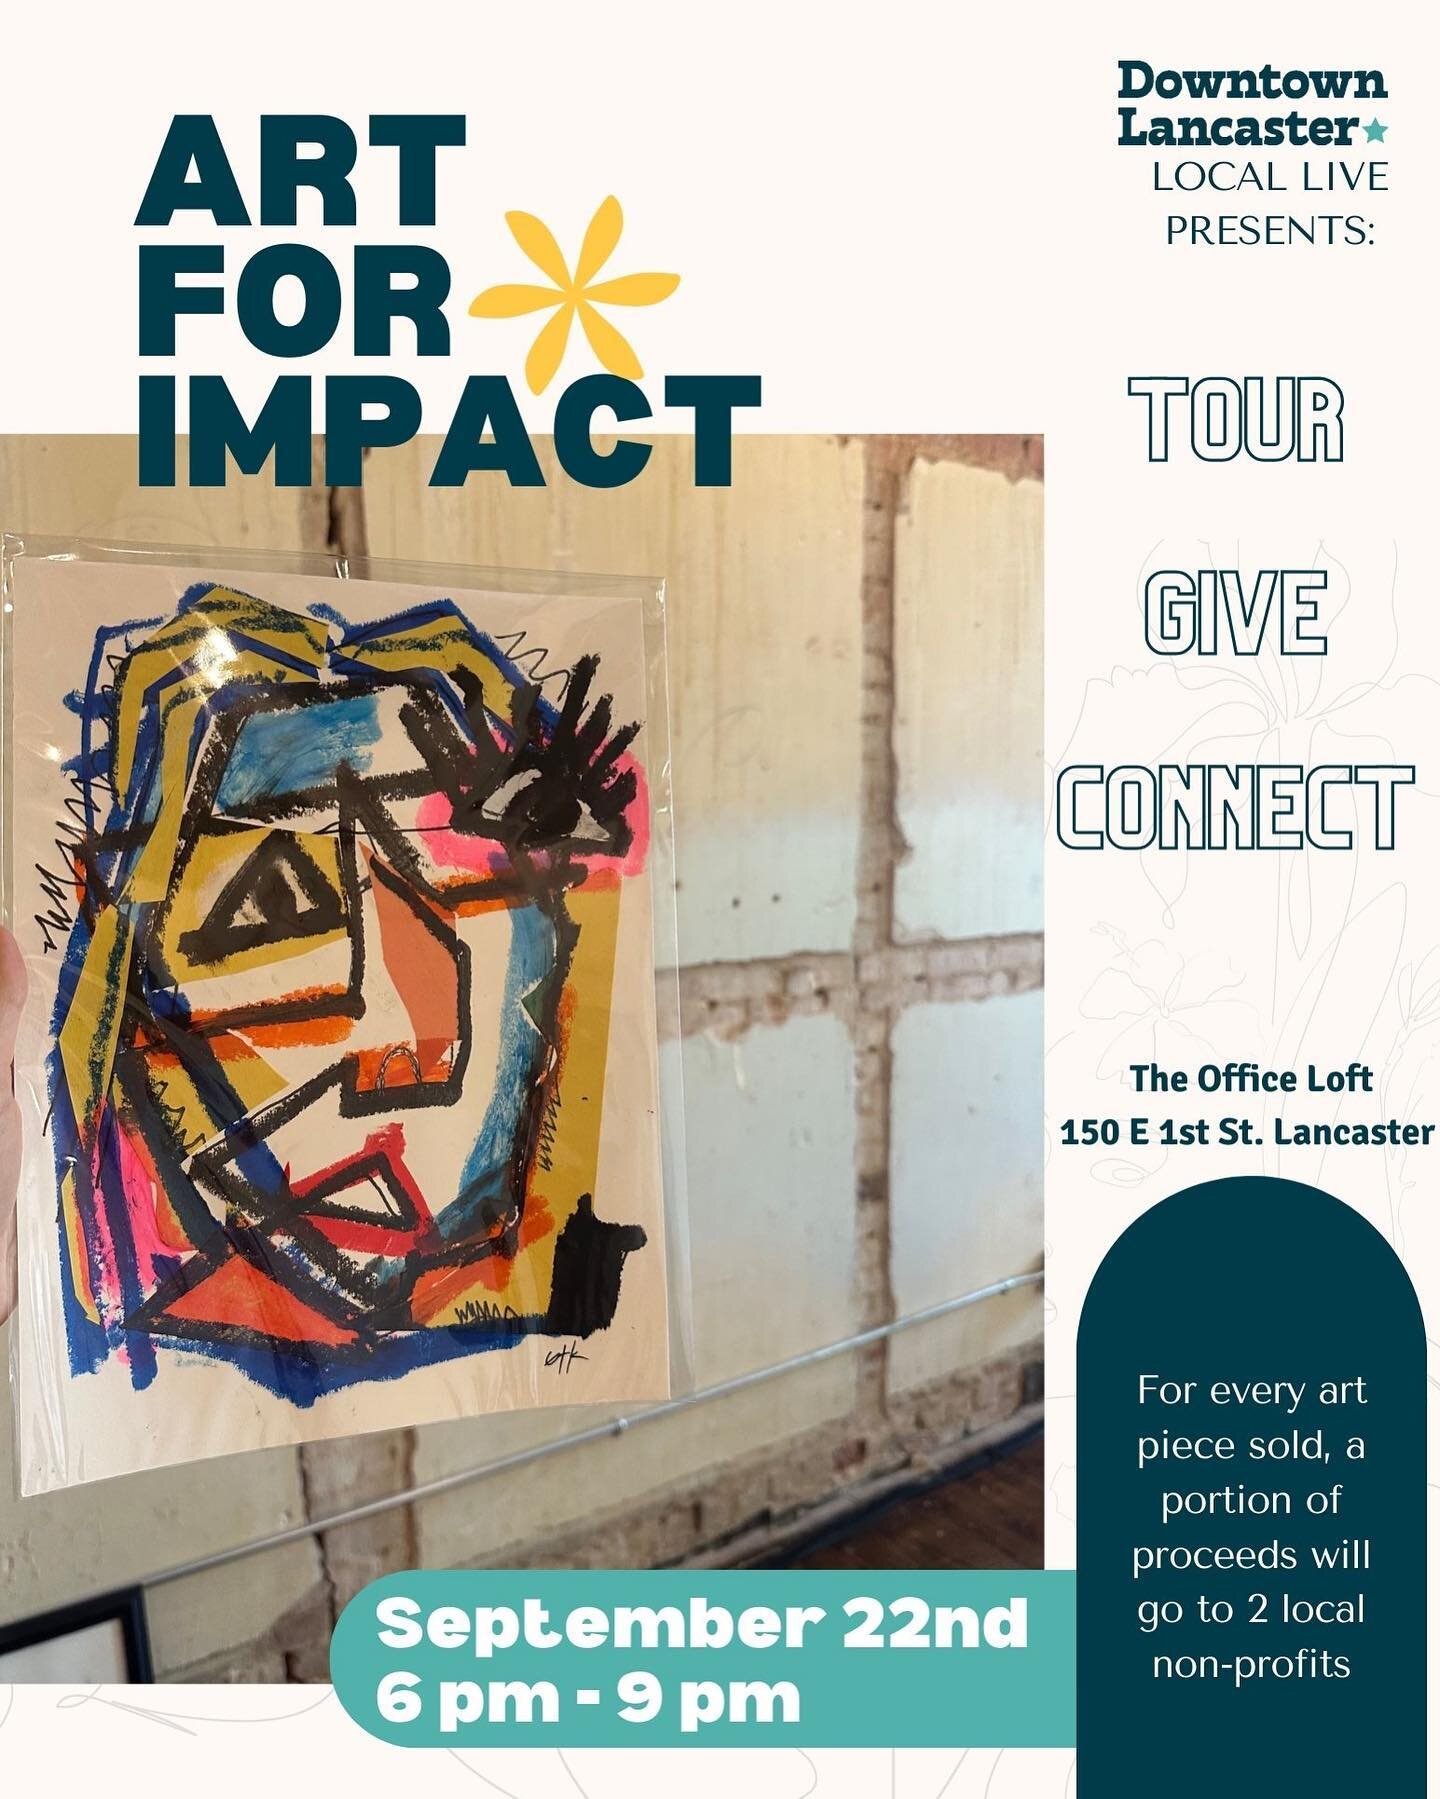 You like art and non-profits? Come out to 📍The Office Loft to support both, in the spirit of @ntxgivingday ! DFW artist on display and giving portion of proceeds to our very own Lancaster NGOs, To You From Us and ConqHer. Come on out, show your supp